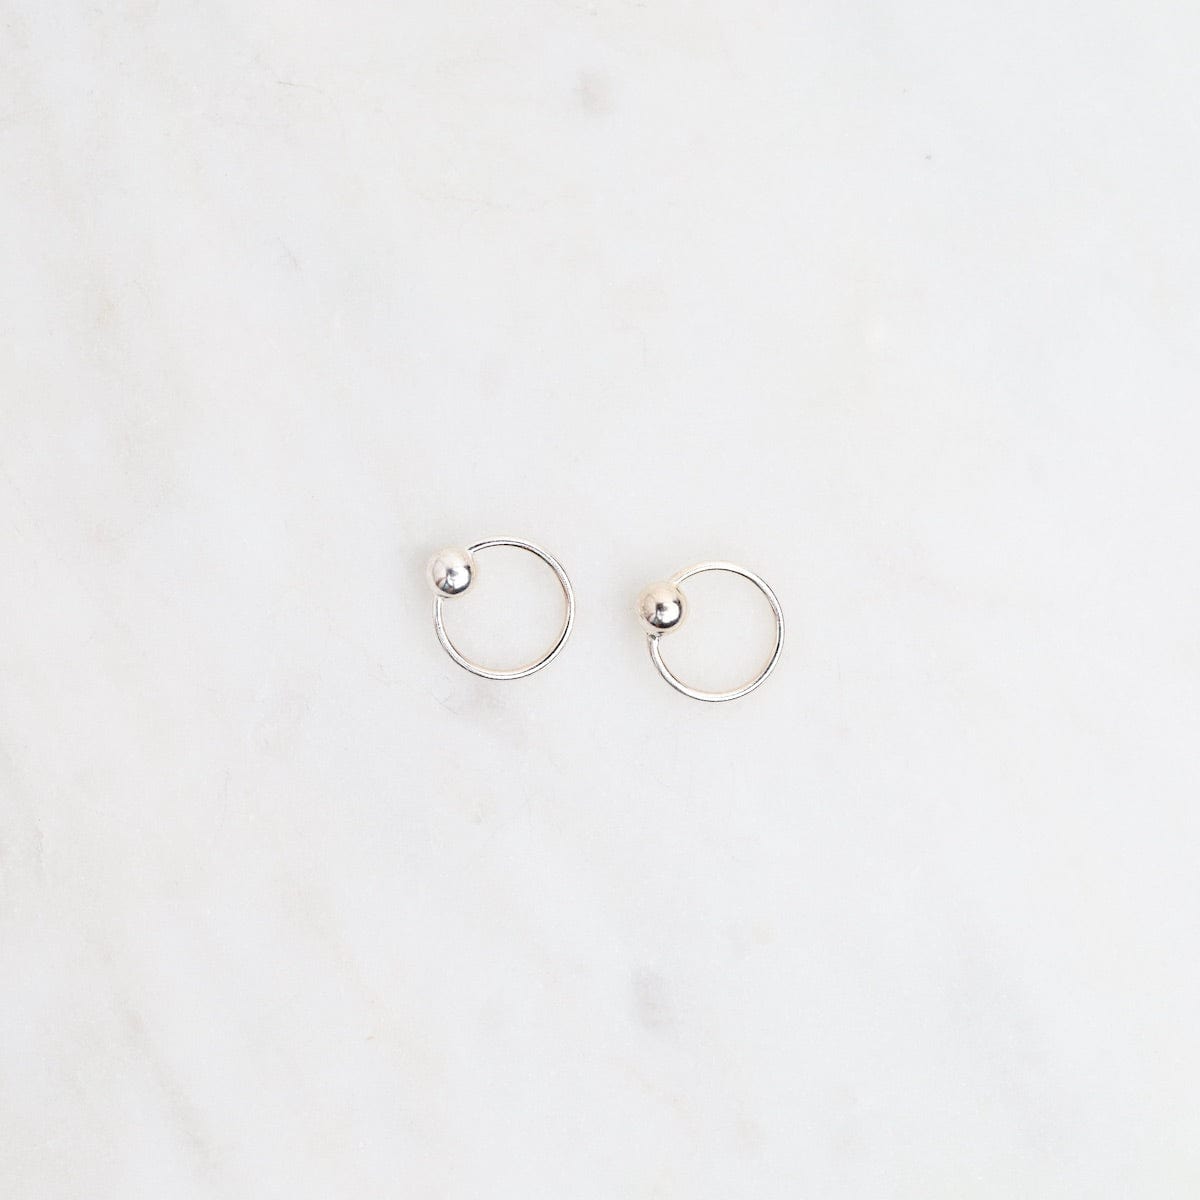 EAR Sterling Silver 7mm Tiny Sleeper Hoops with Ball